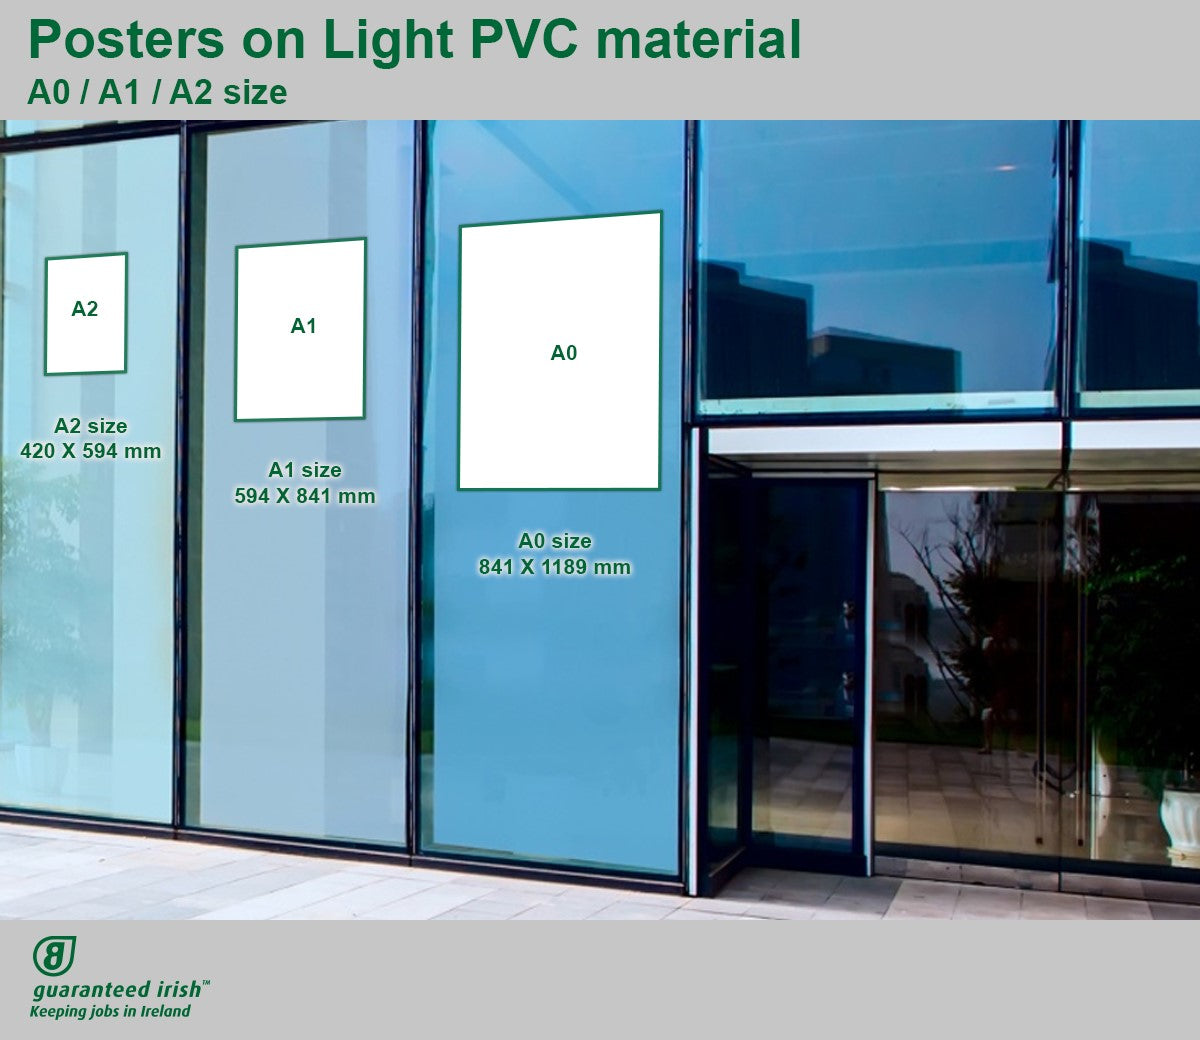 Posters on Light PVC Material Outdoor